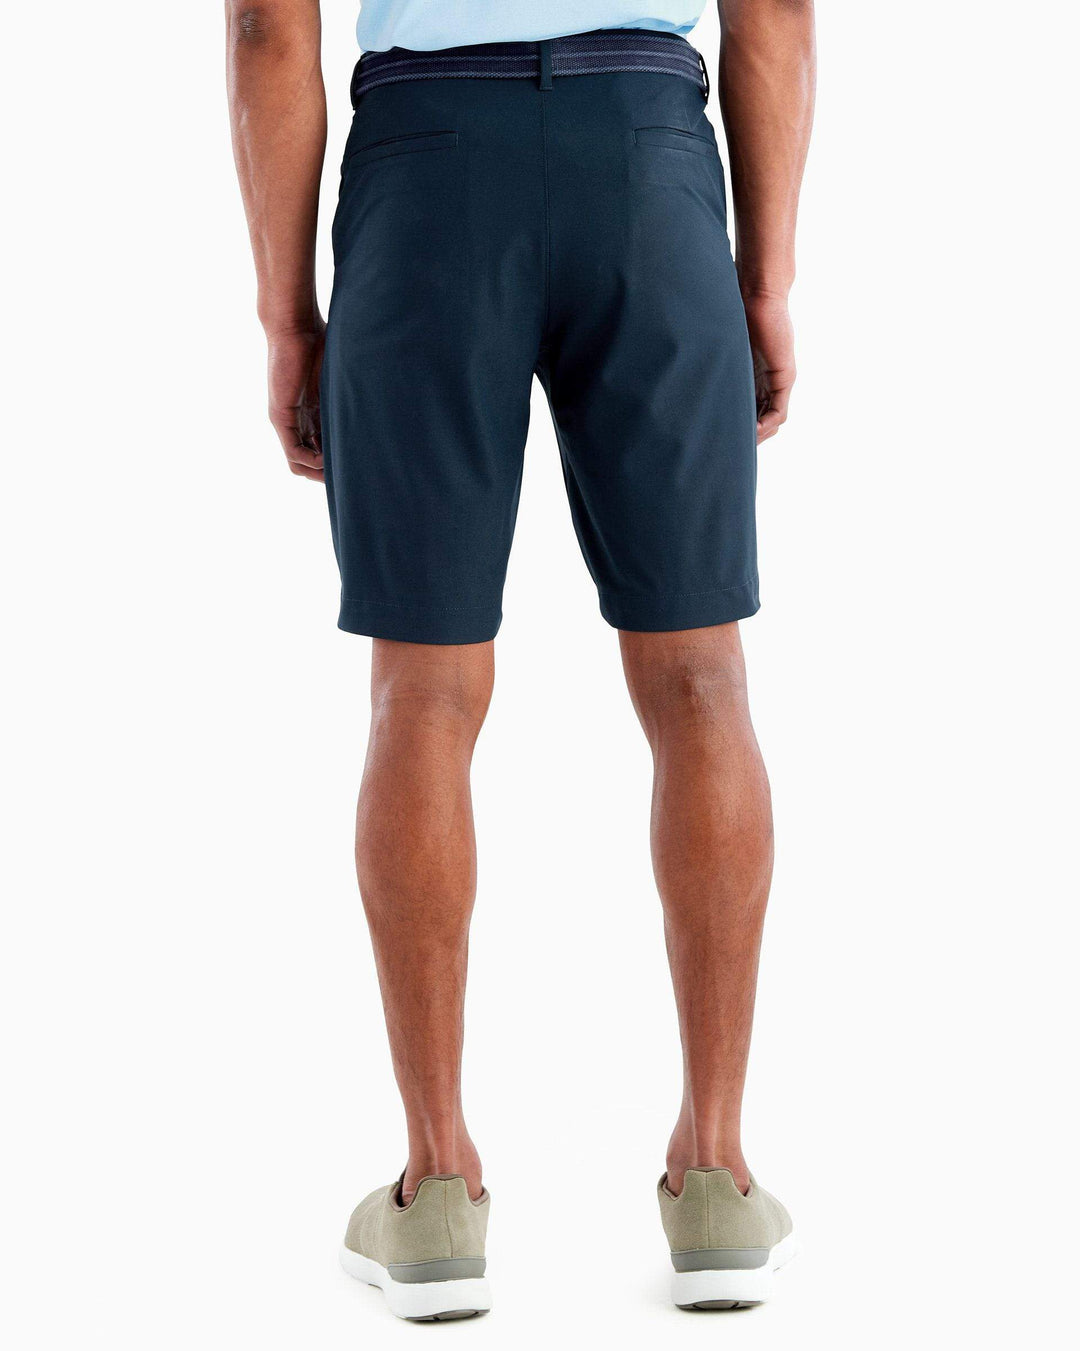 CROSS COUNTRY SHORTS (HIGH TIDE) - JOHNNIE-O